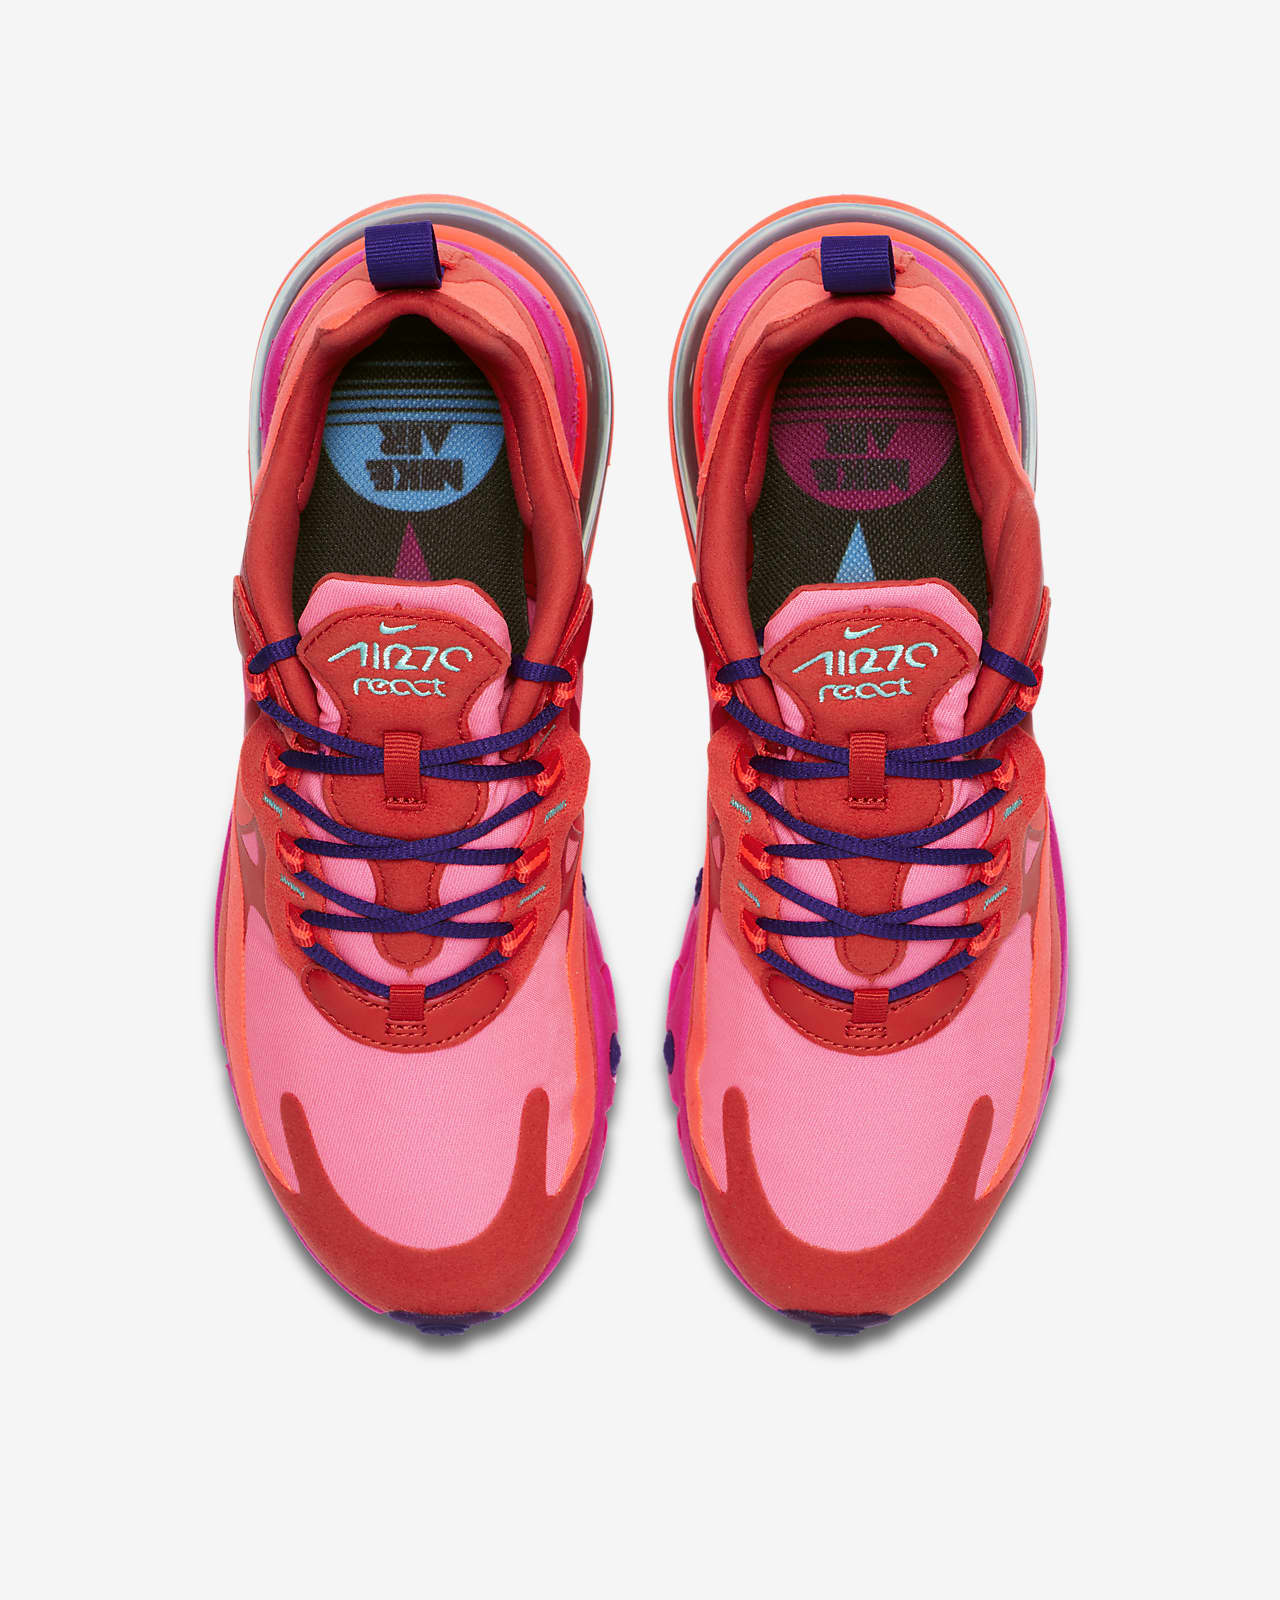 air max 270 react red and pink